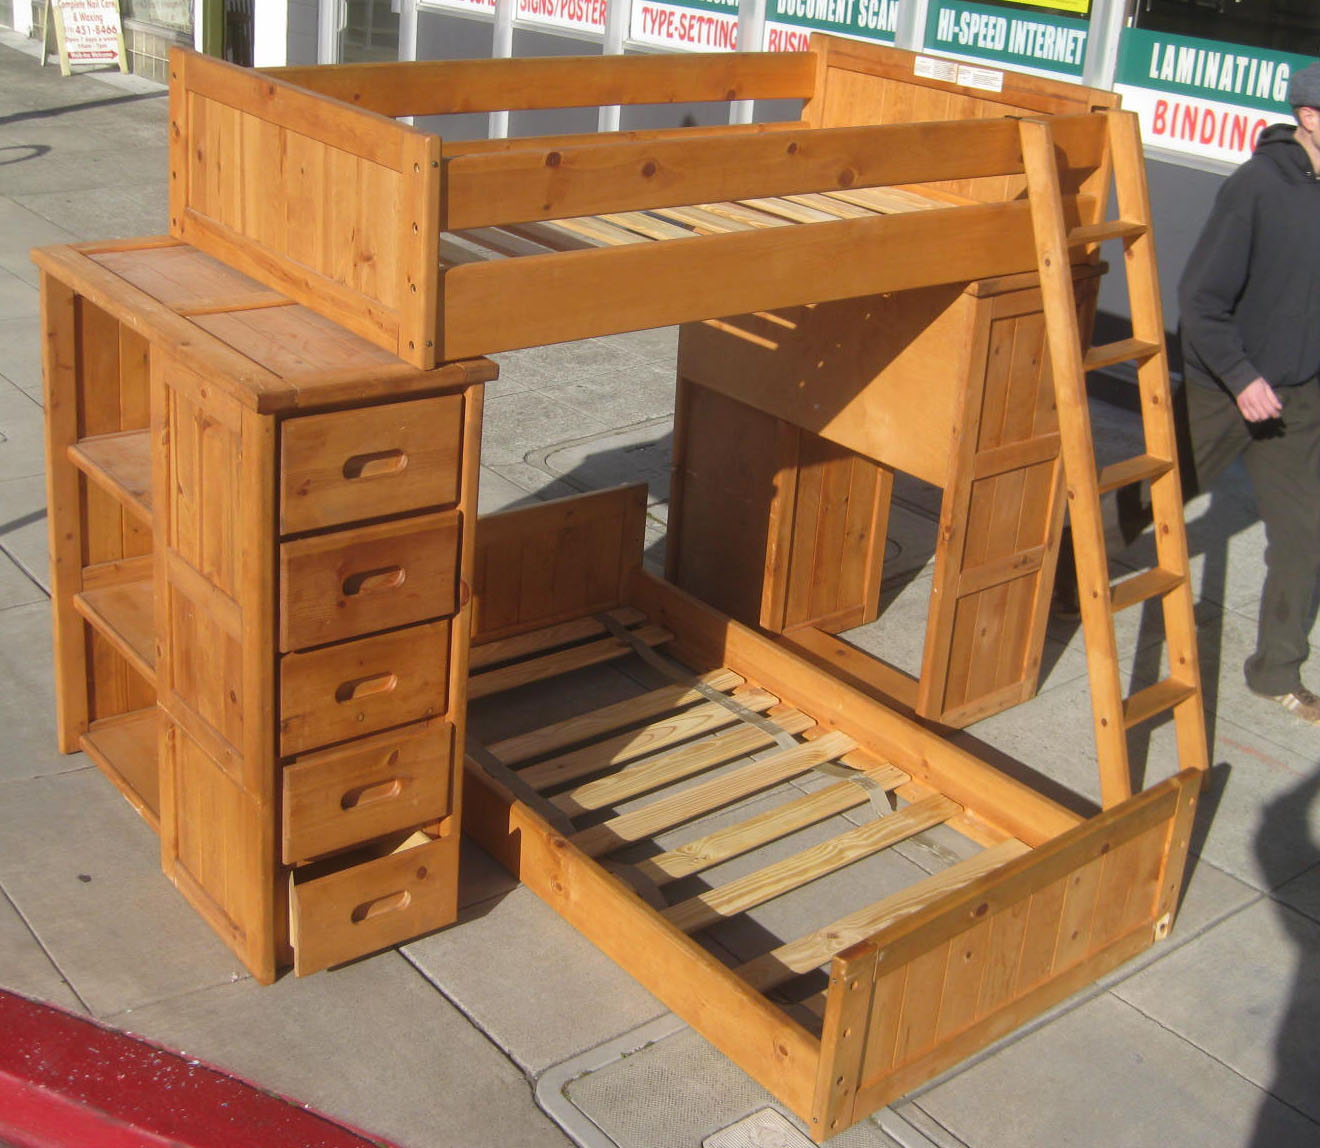 wood bunk bed with desk and drawers